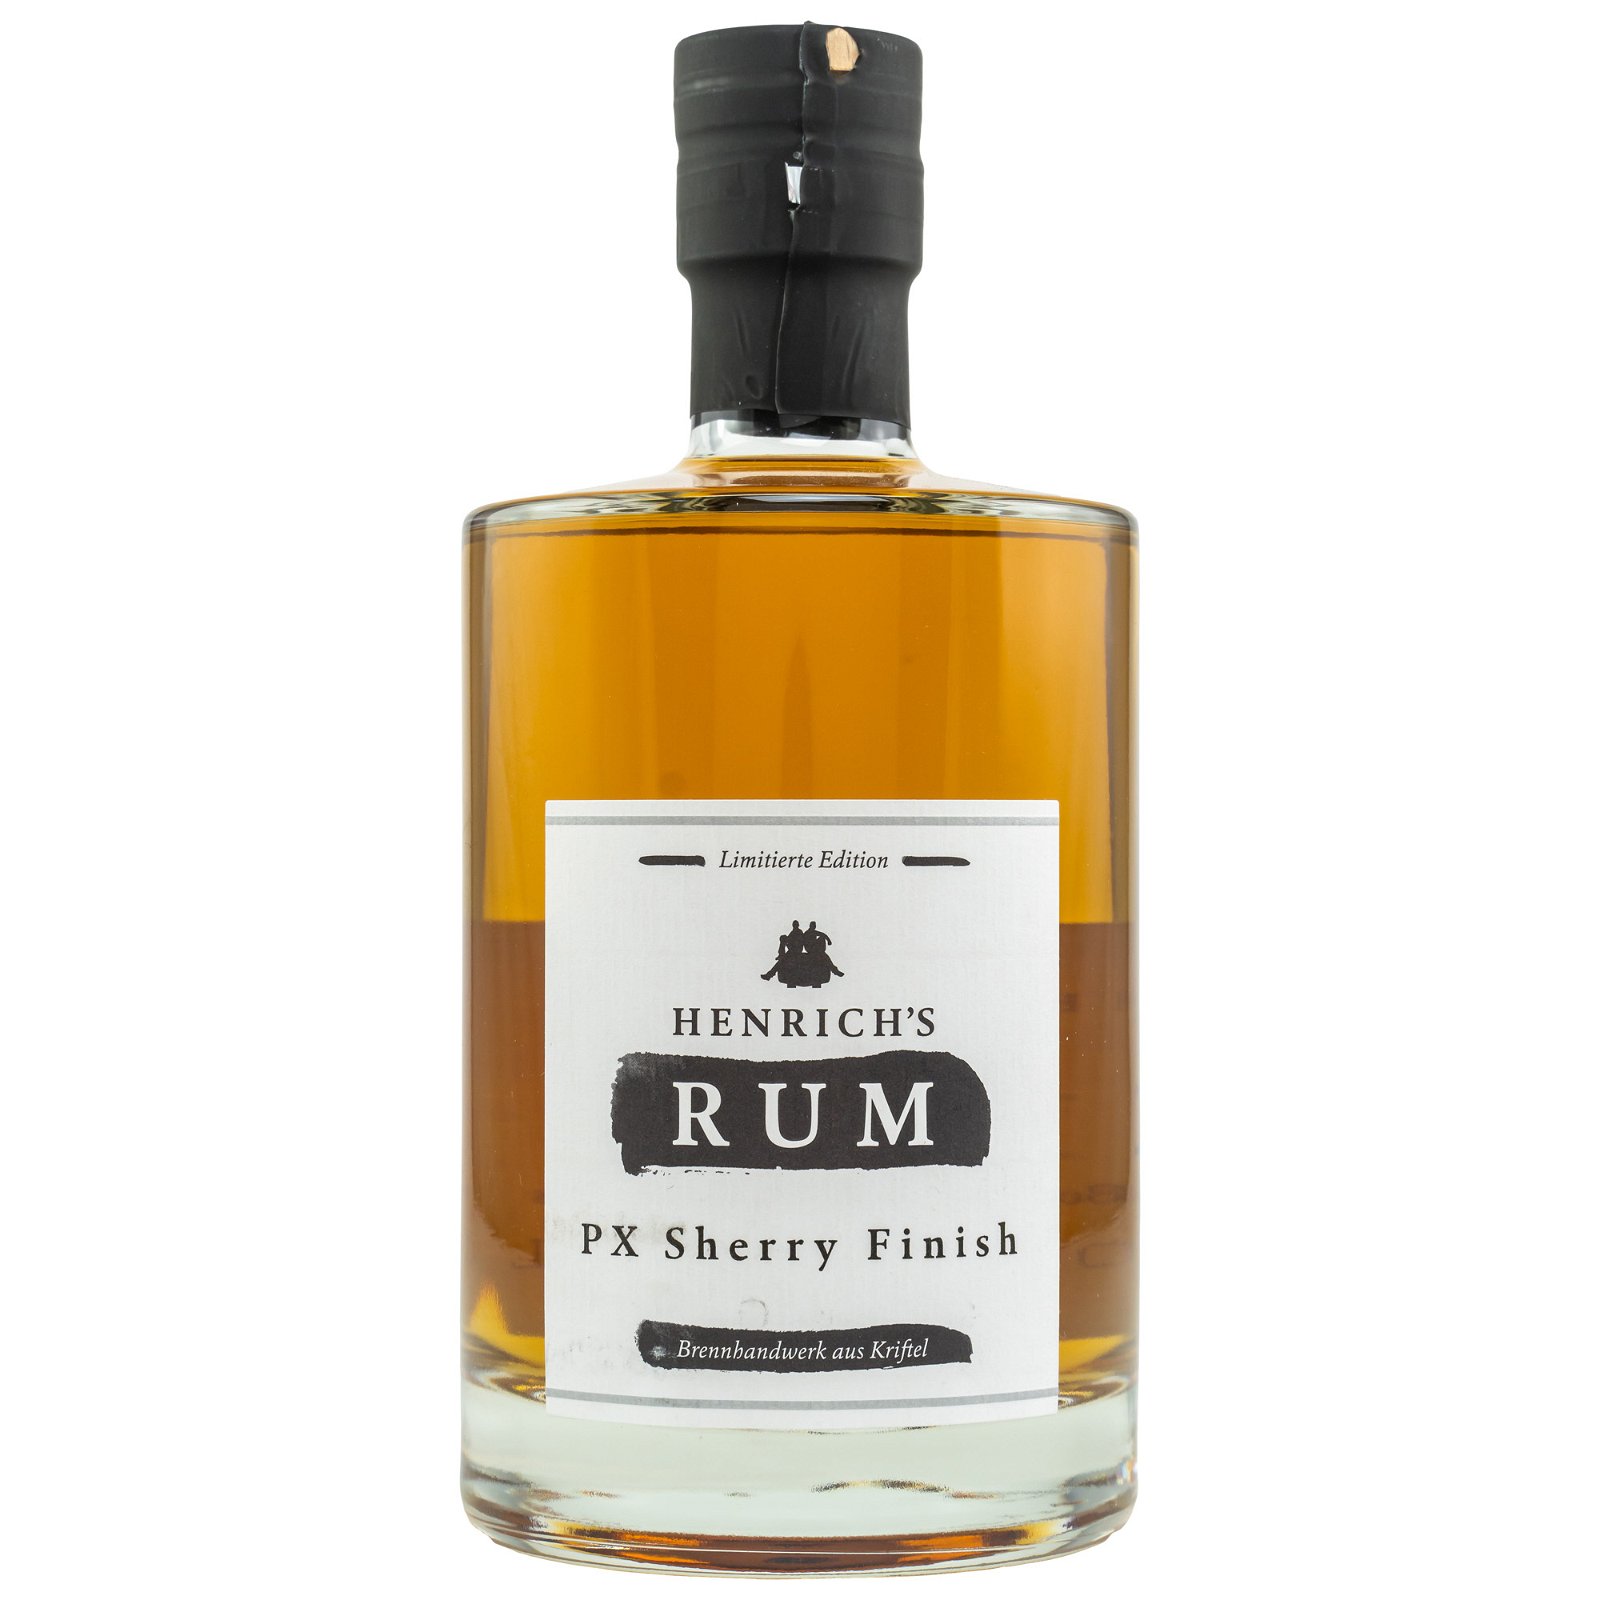 Henrich´s Rum PX Sherry Finish